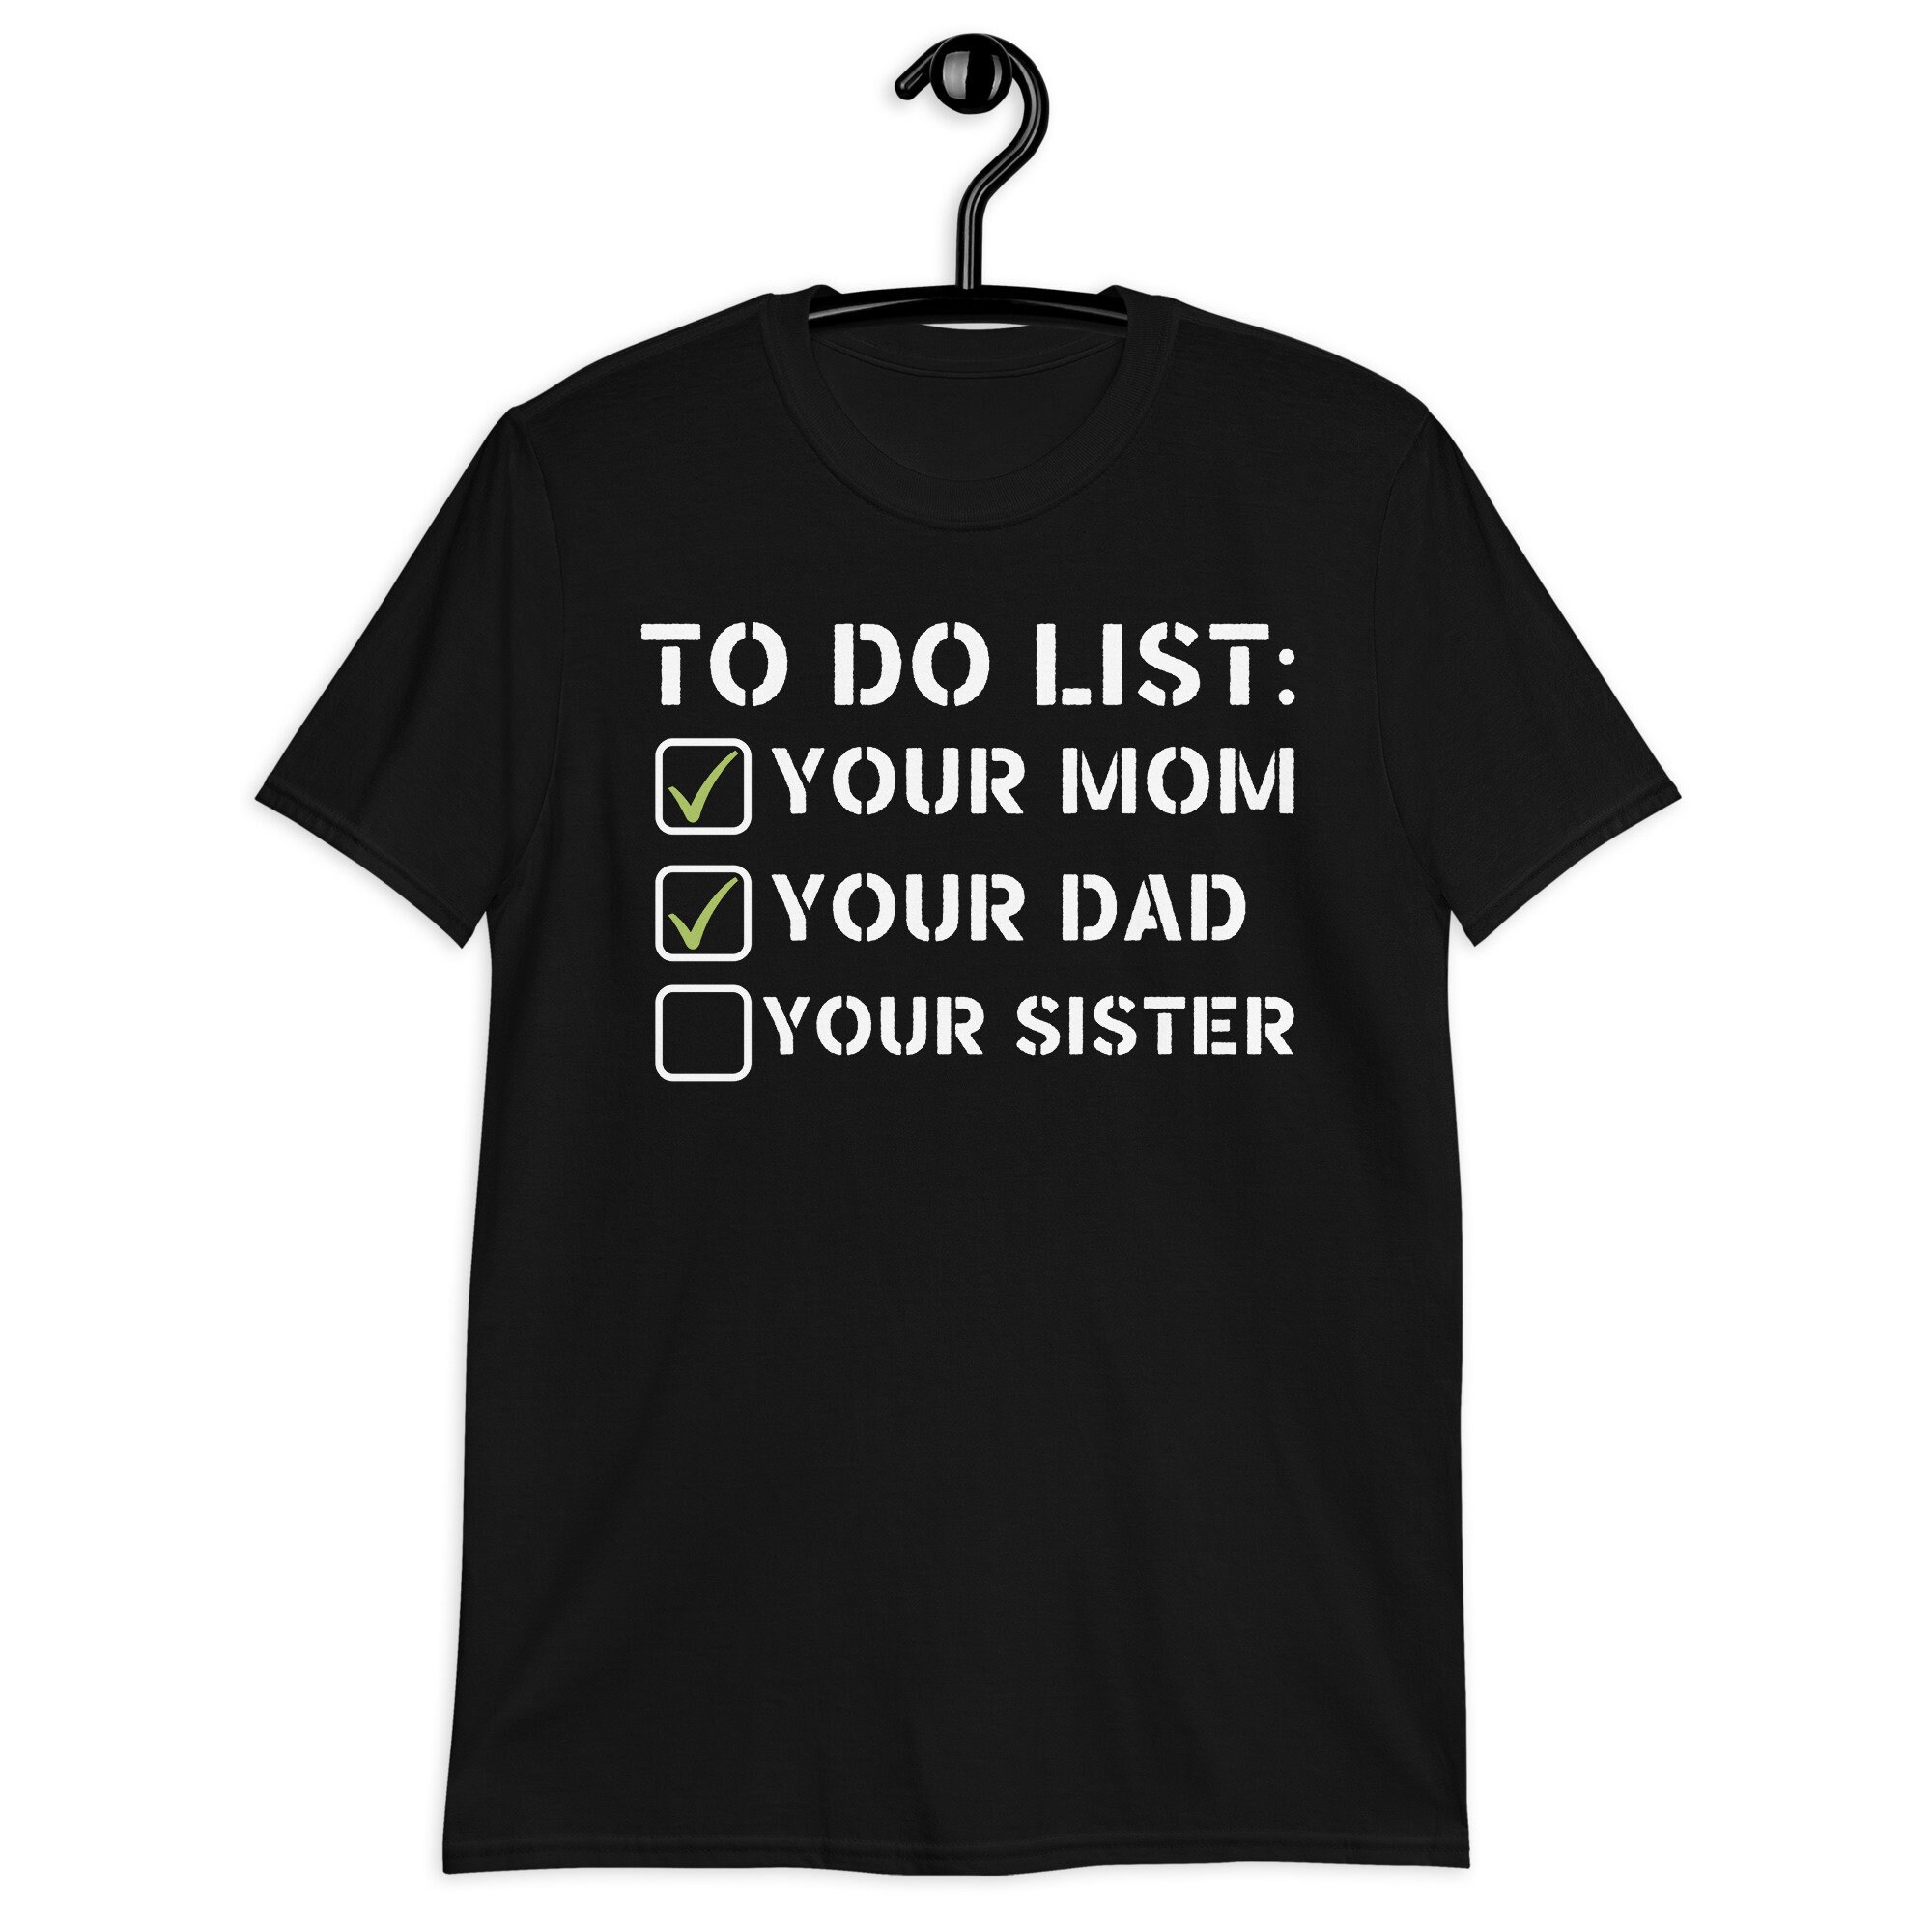 Discover To Do List Your Mom, To Do List Your Dad Your Sister Shirt, Sarcastic Gifts, Mom Meme Shirt